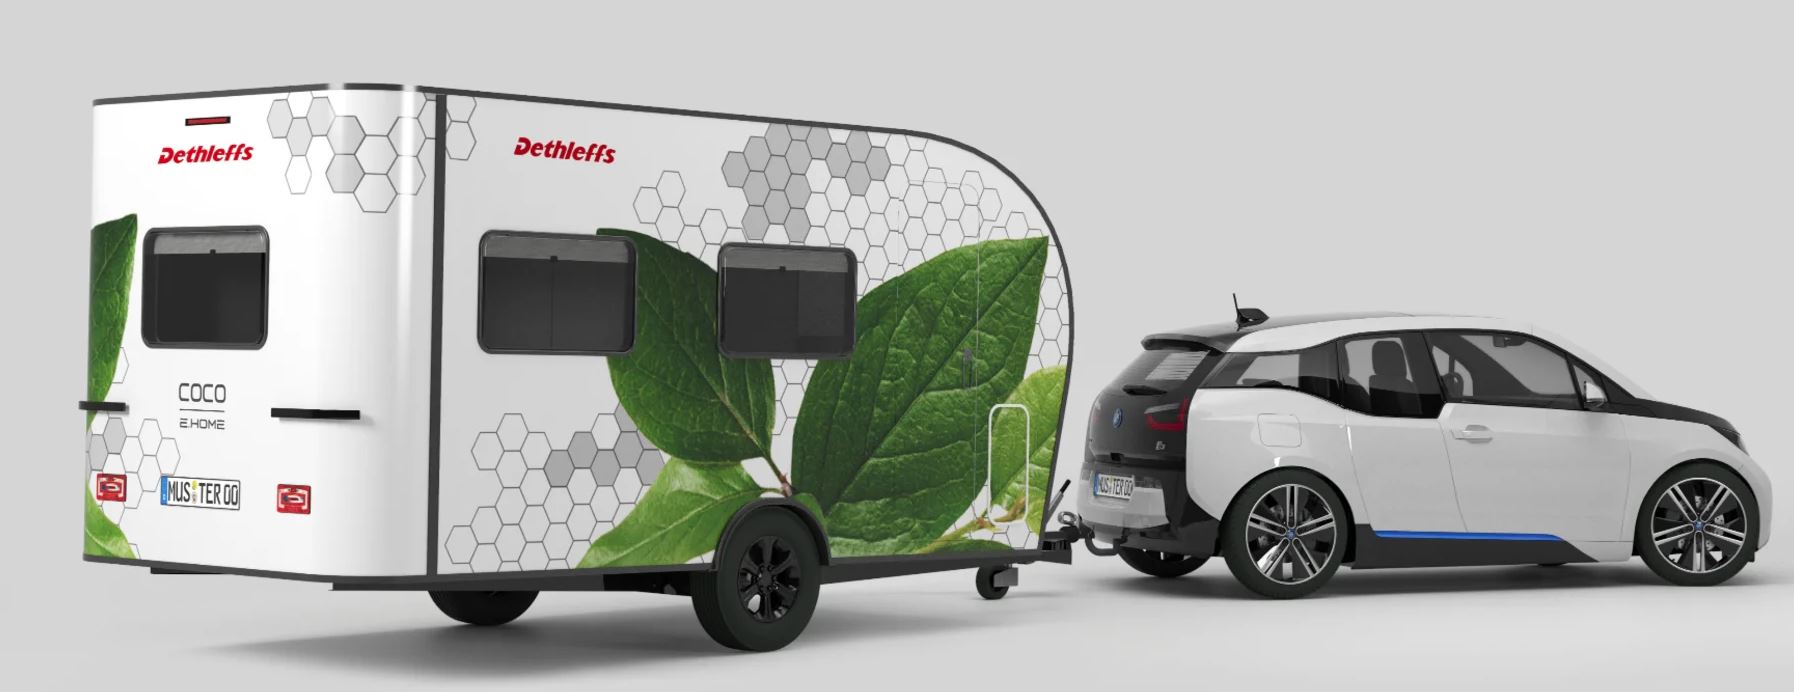 e.home Coco Is the Electric Caravan That Tows Itself, Completely Self